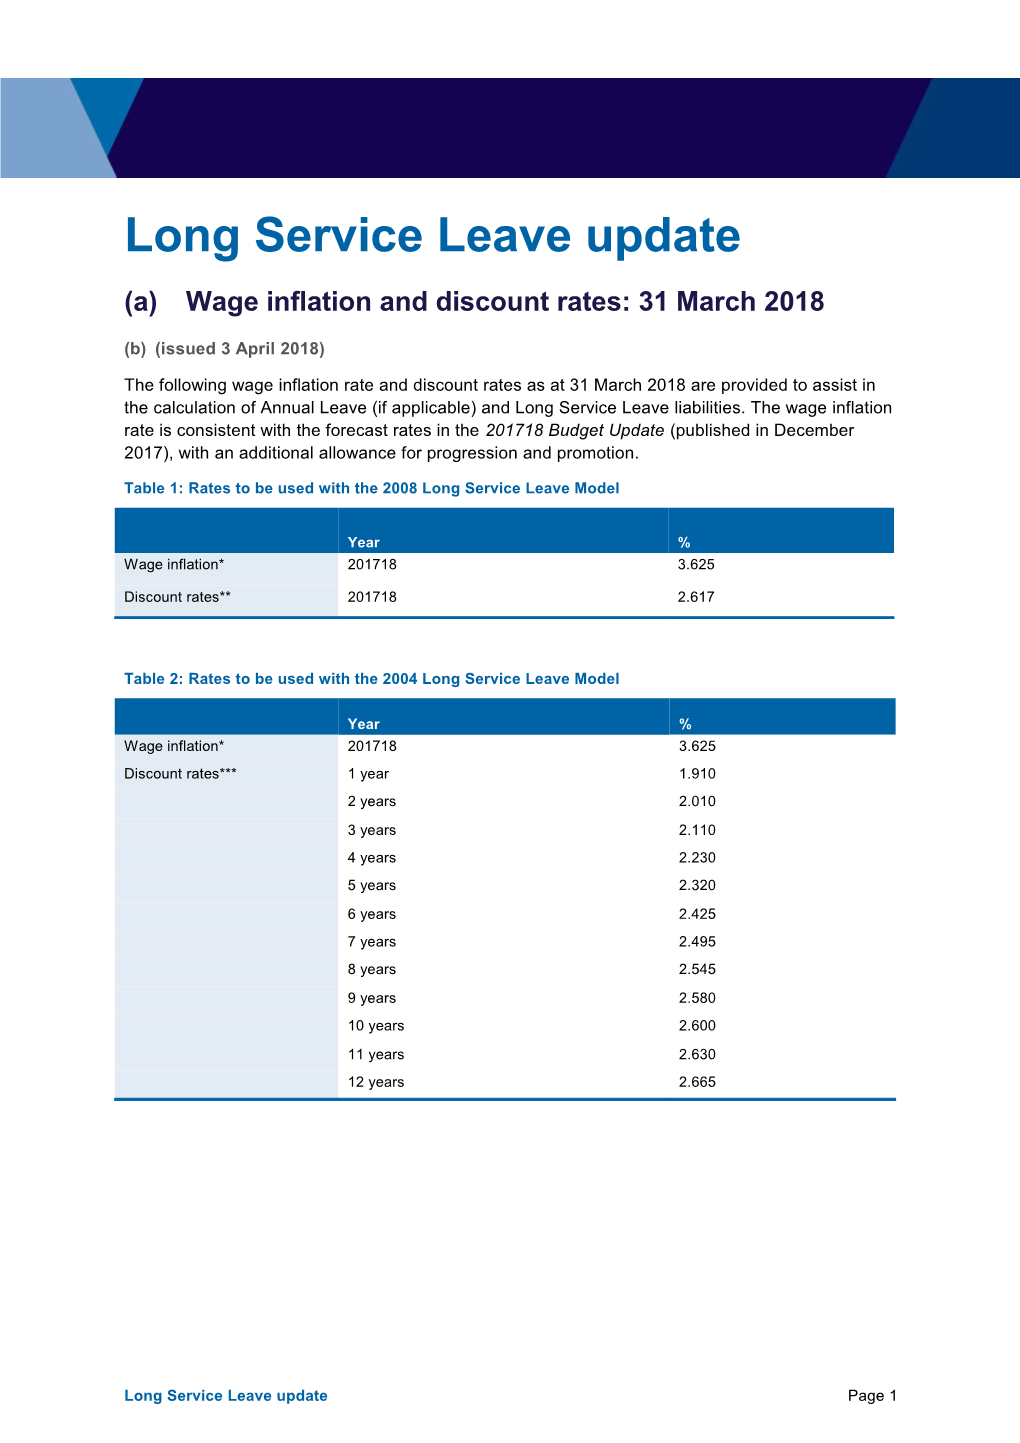 Long Service Leave Update